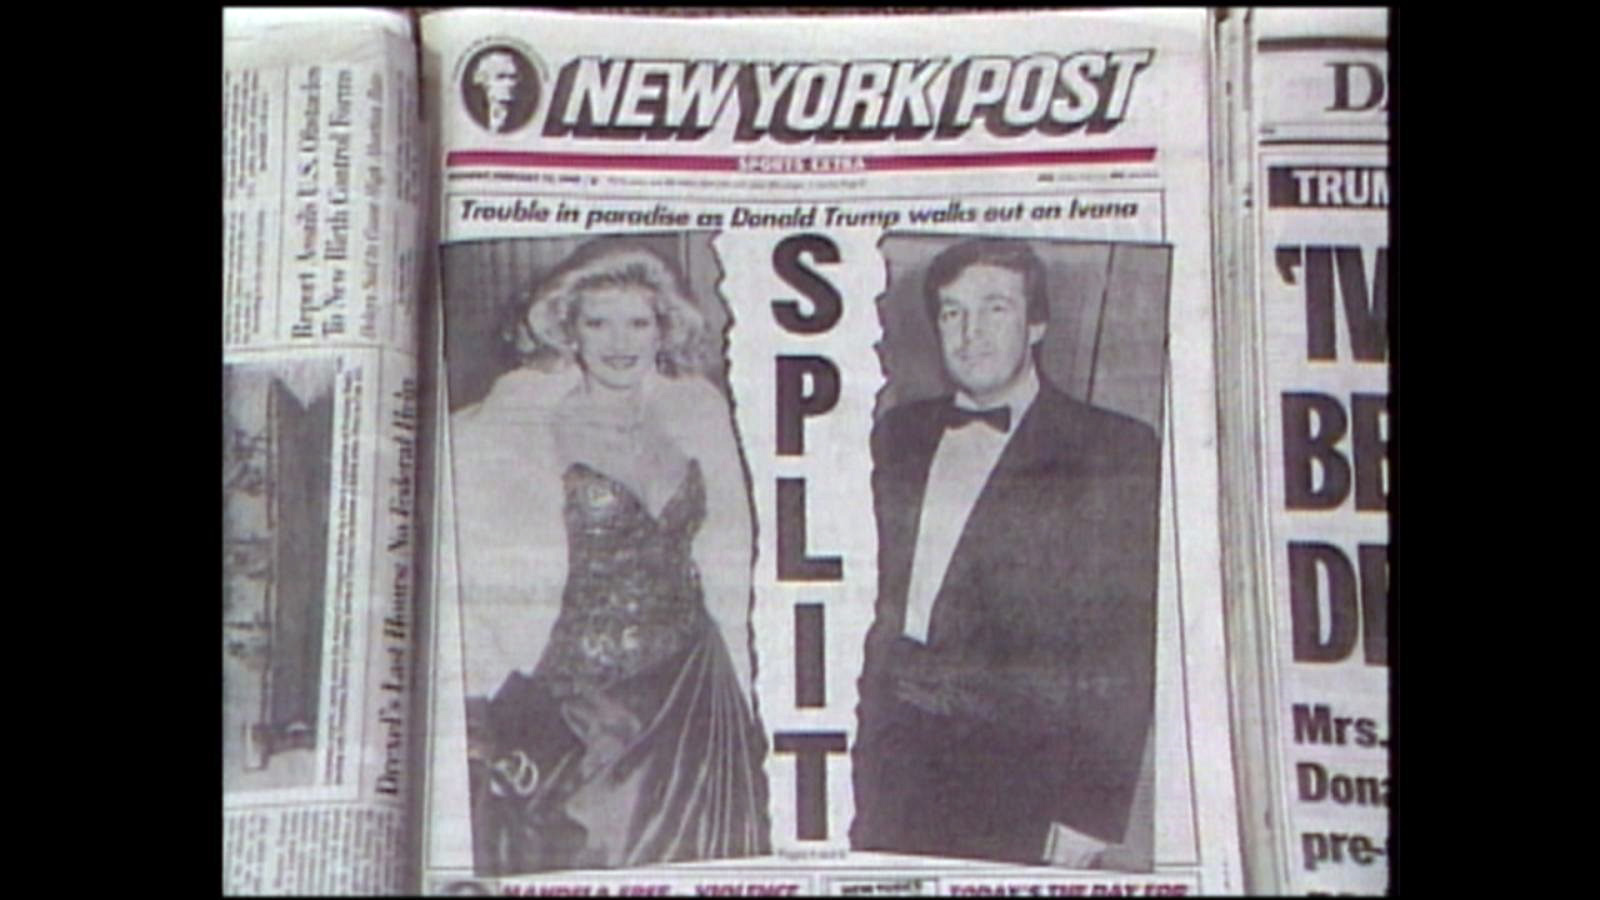 PHOTO: The cover of the New York Post newspaper reports the news of Ivana and Donald Trump's split.